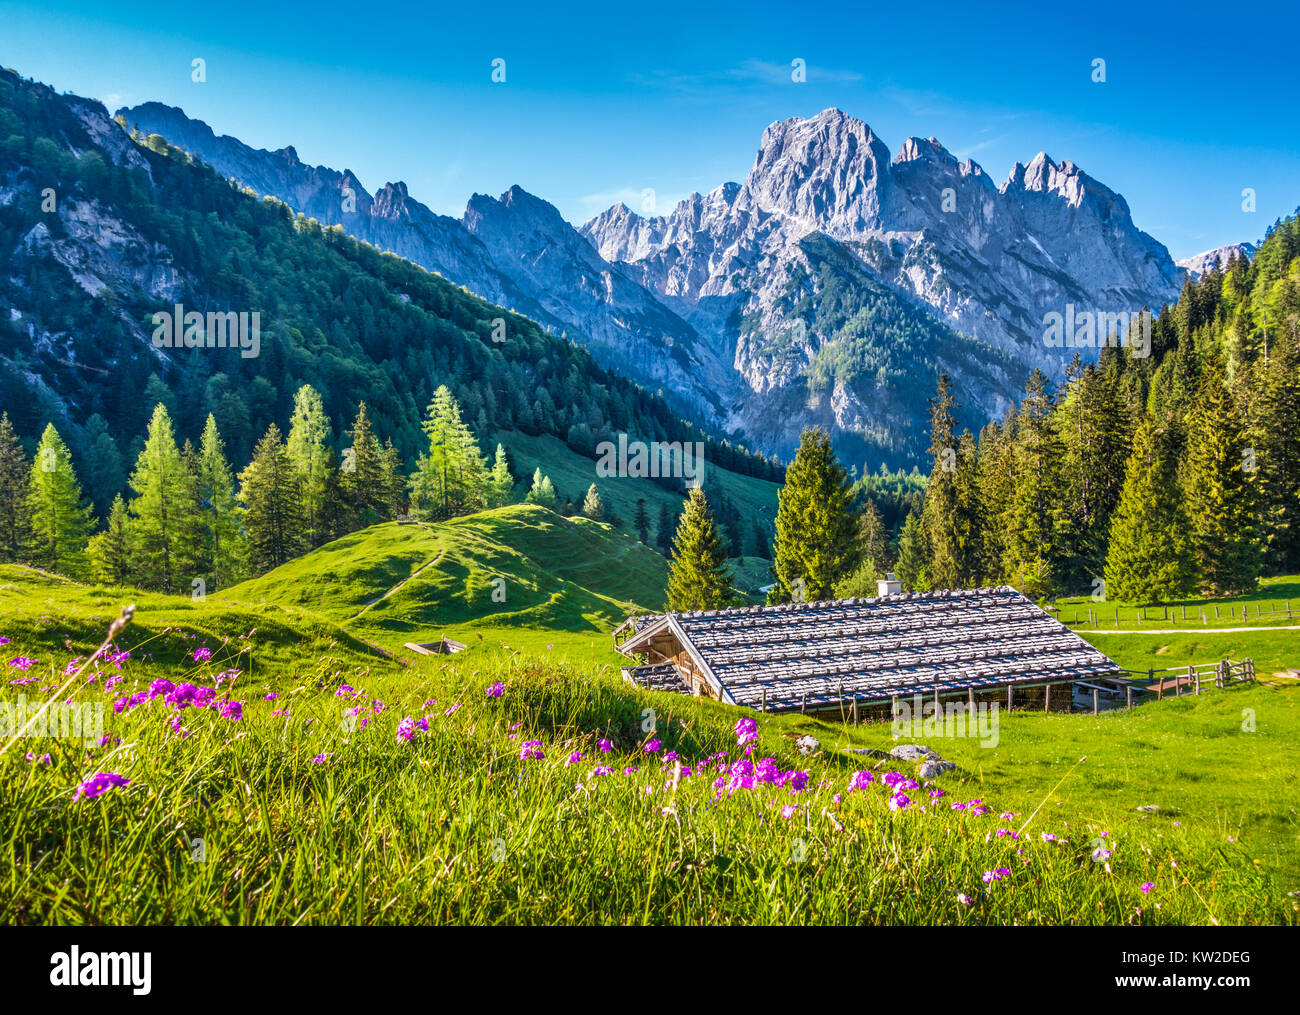 Idyllic landscape in the Alps with traditional mountain chalet and fresh green mountain pastures with blooming flowers at sunset Stock Photo